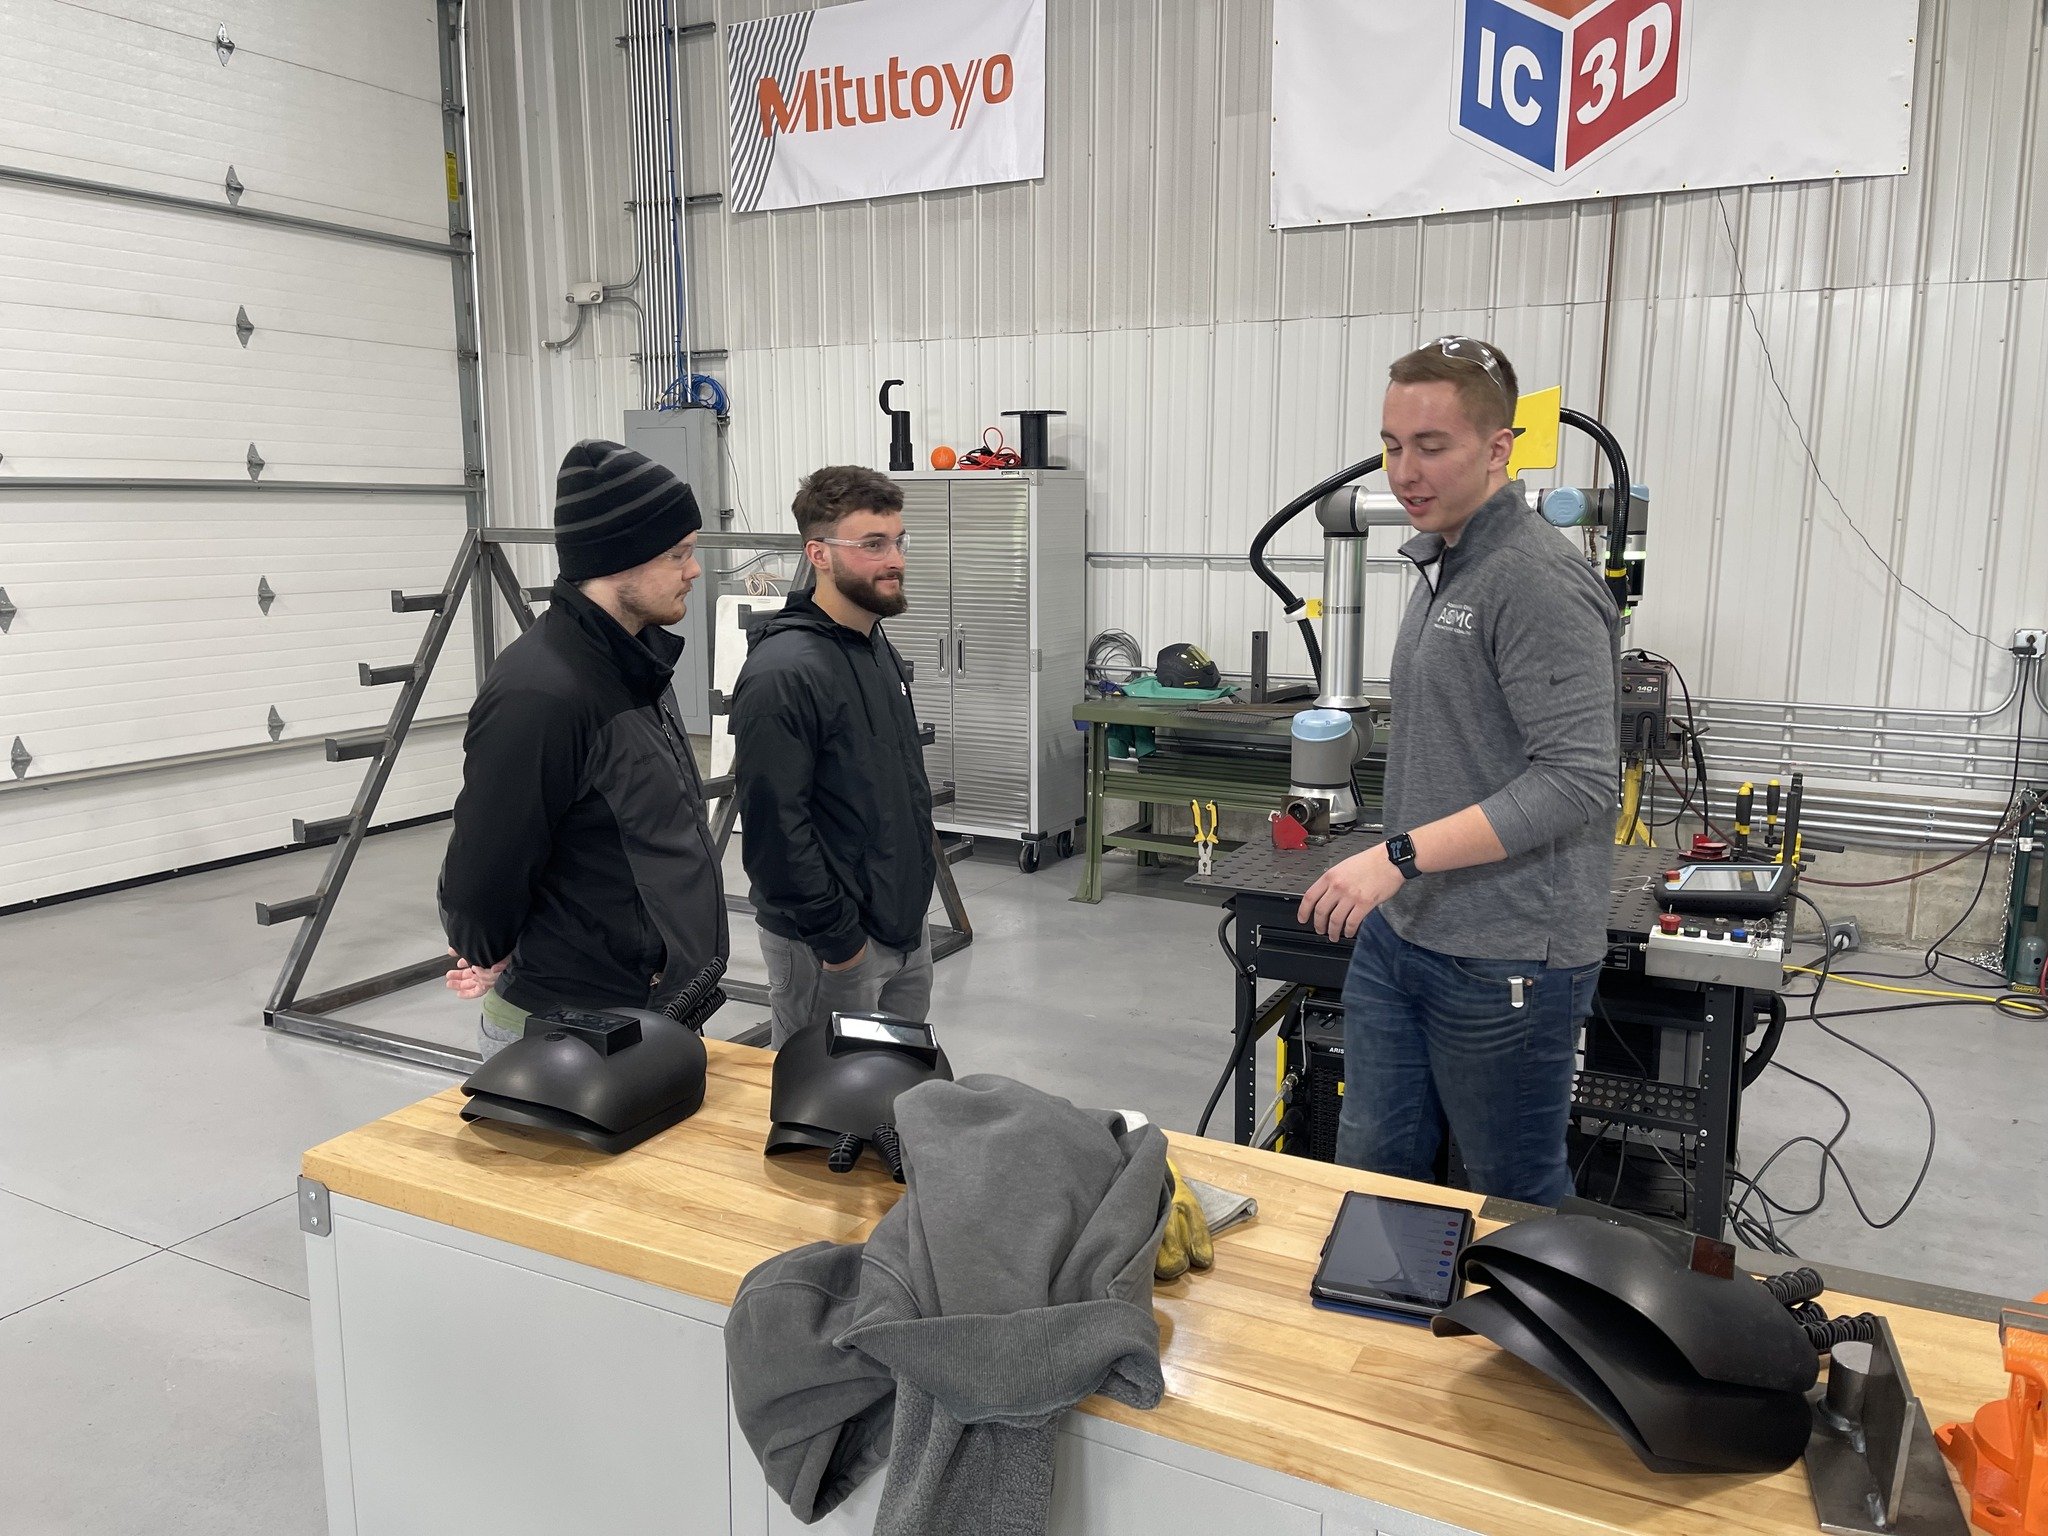 OU's ETM seniors recently visited the Manufacturing Support Center for some hands-on training of our ESAB Cobot welder, Yaskawa Arcworld, and FESTO machine tender. The students were presented a practical challenge that they had to program the robots 